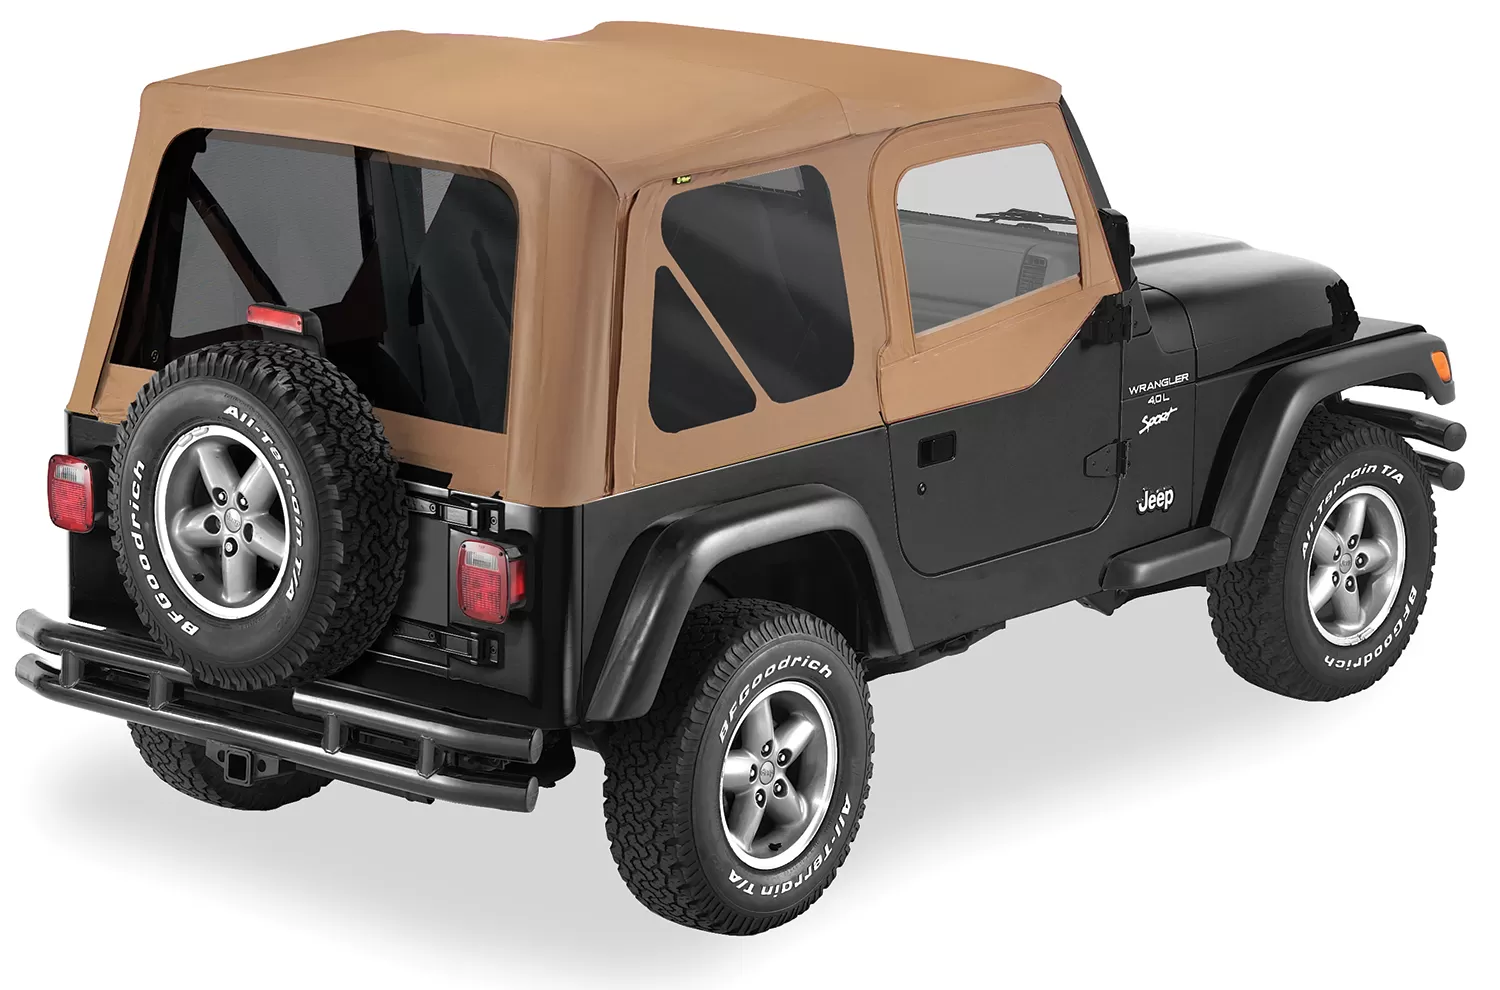 Pavement Ends By Bestop Spice Replay OEM Replacement Soft Top Tinted Windows w/ Upper Door Skins Jeep Wrangler 1997-2006 - 51197-37